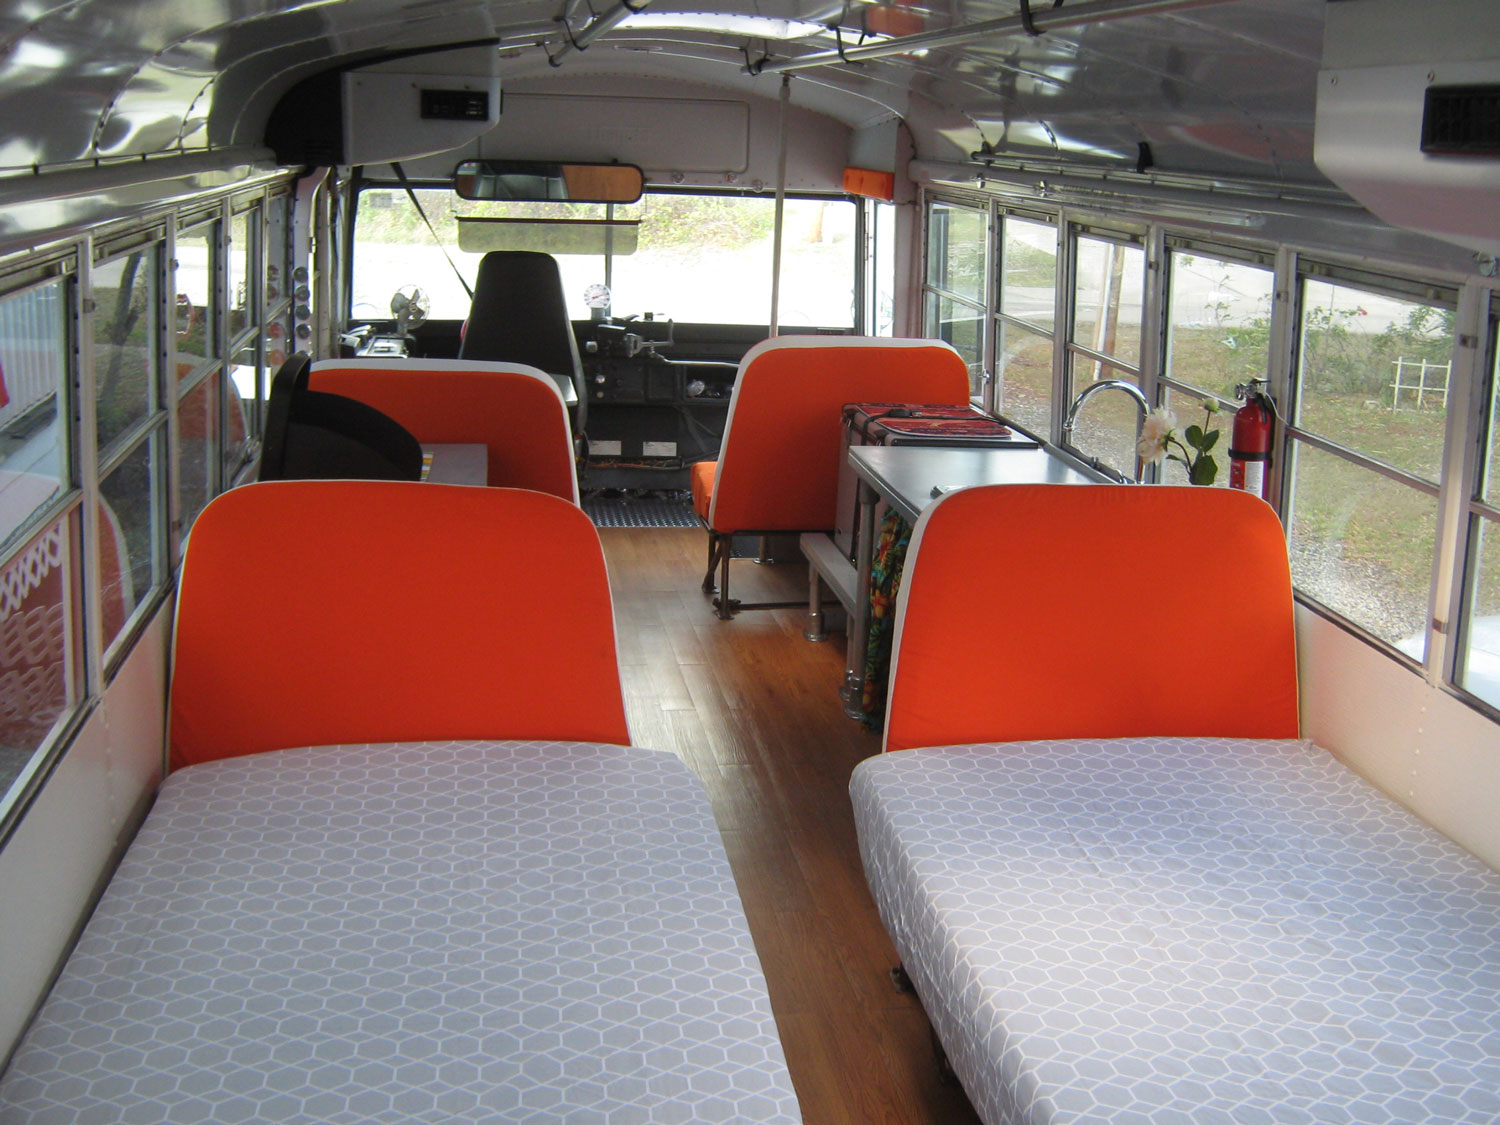 Our Skoolie was designed with two beds.